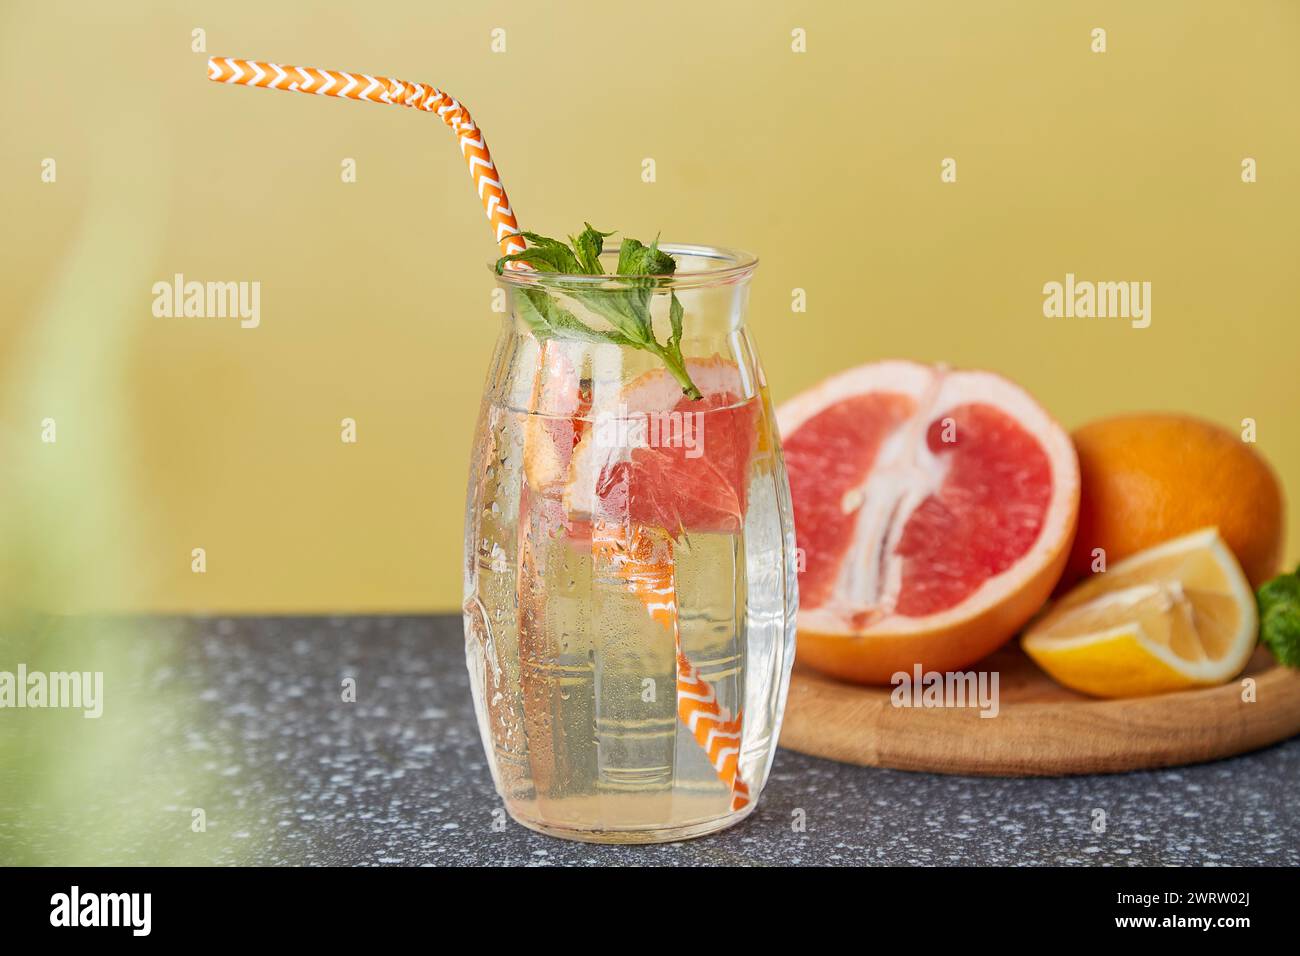 Vitaminized summer detox water. Aesthetic refreshing cocktails with citrus fruits. Low-alcohol drinks, hard seltzer cocktail concept. Stock Photo